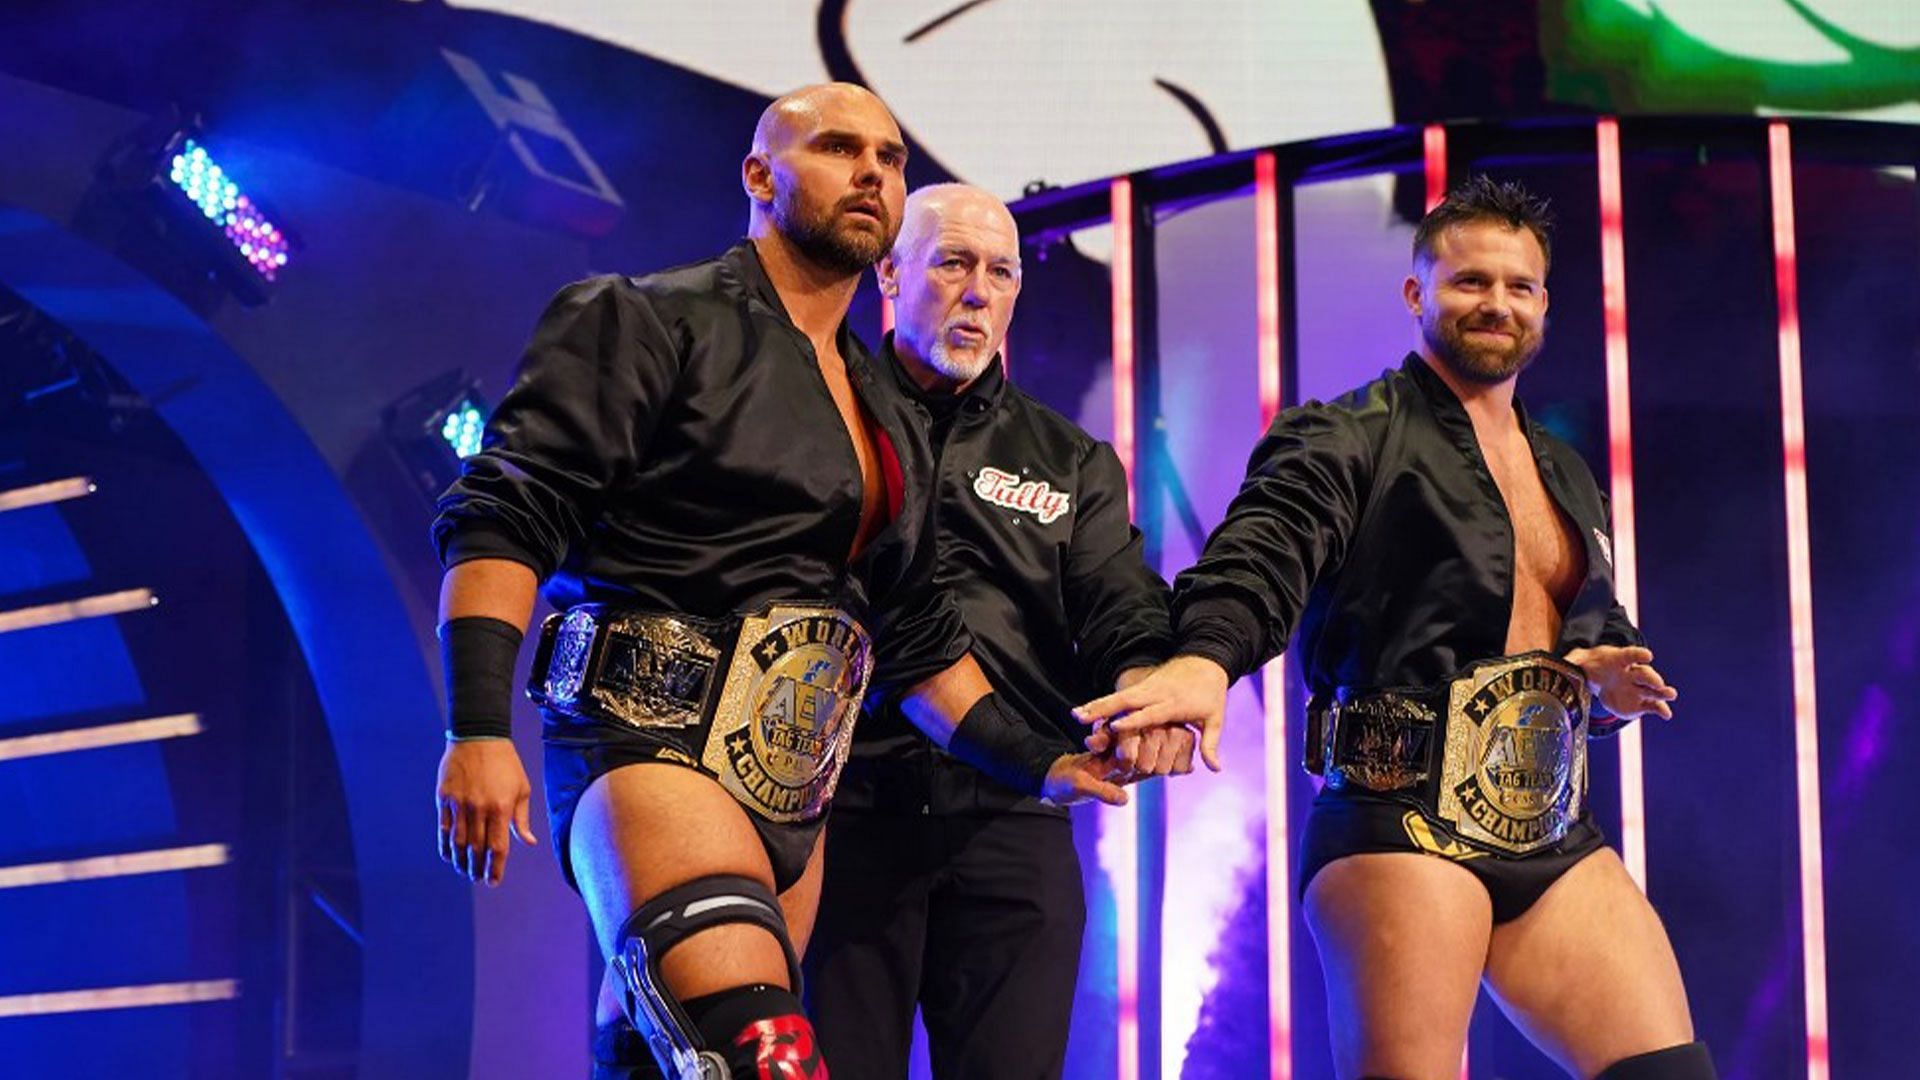 FTR are currently signed to AEW